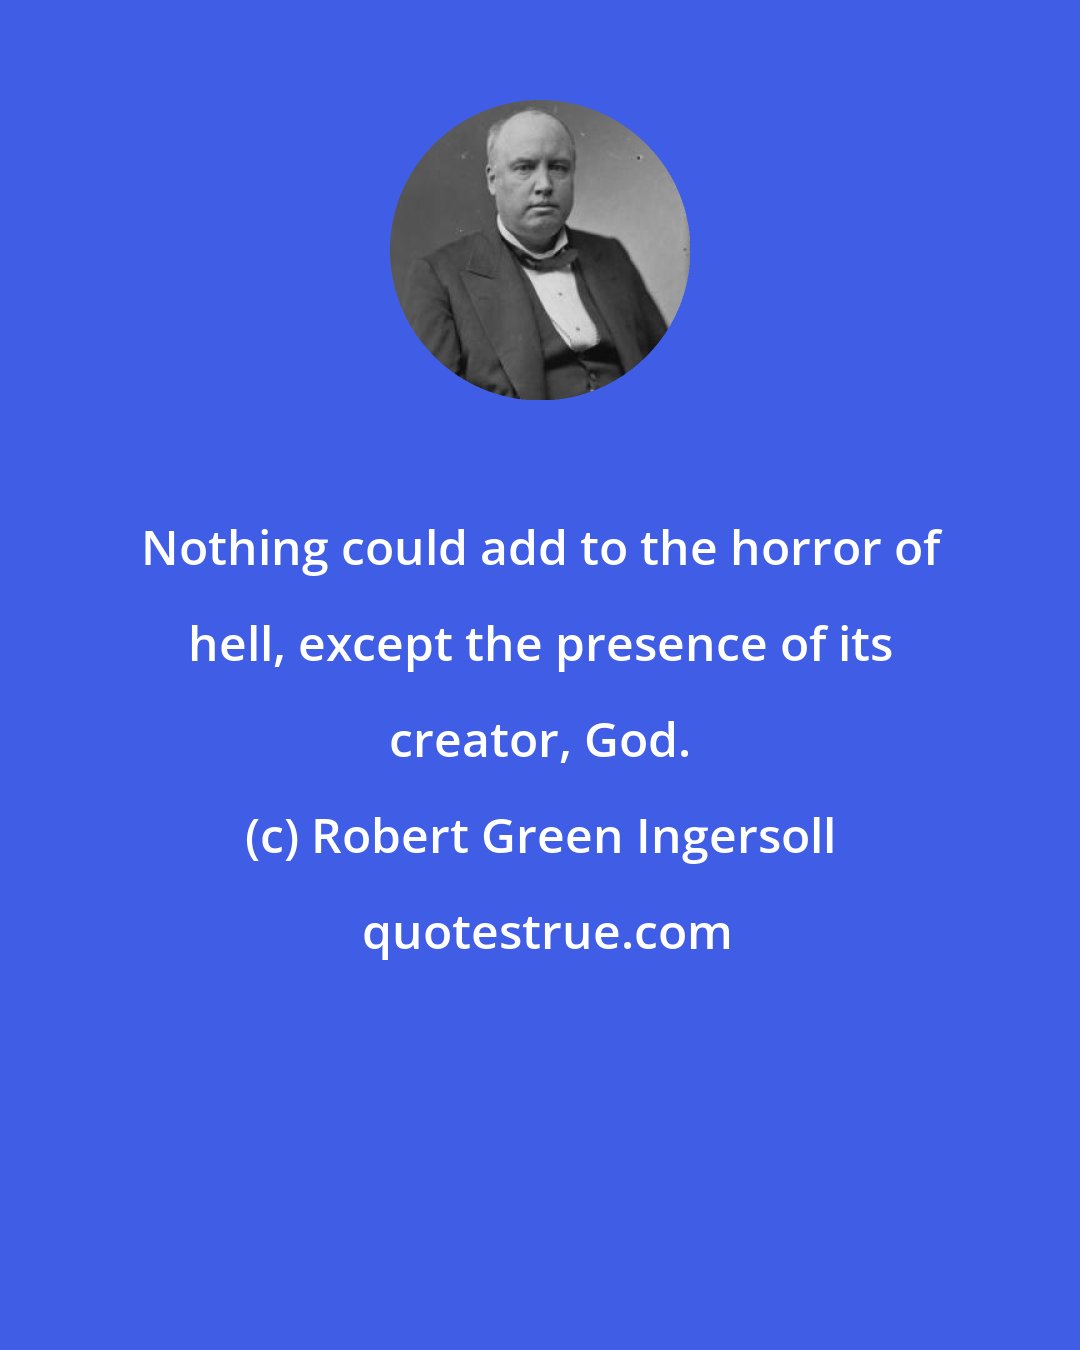 Robert Green Ingersoll: Nothing could add to the horror of hell, except the presence of its creator, God.